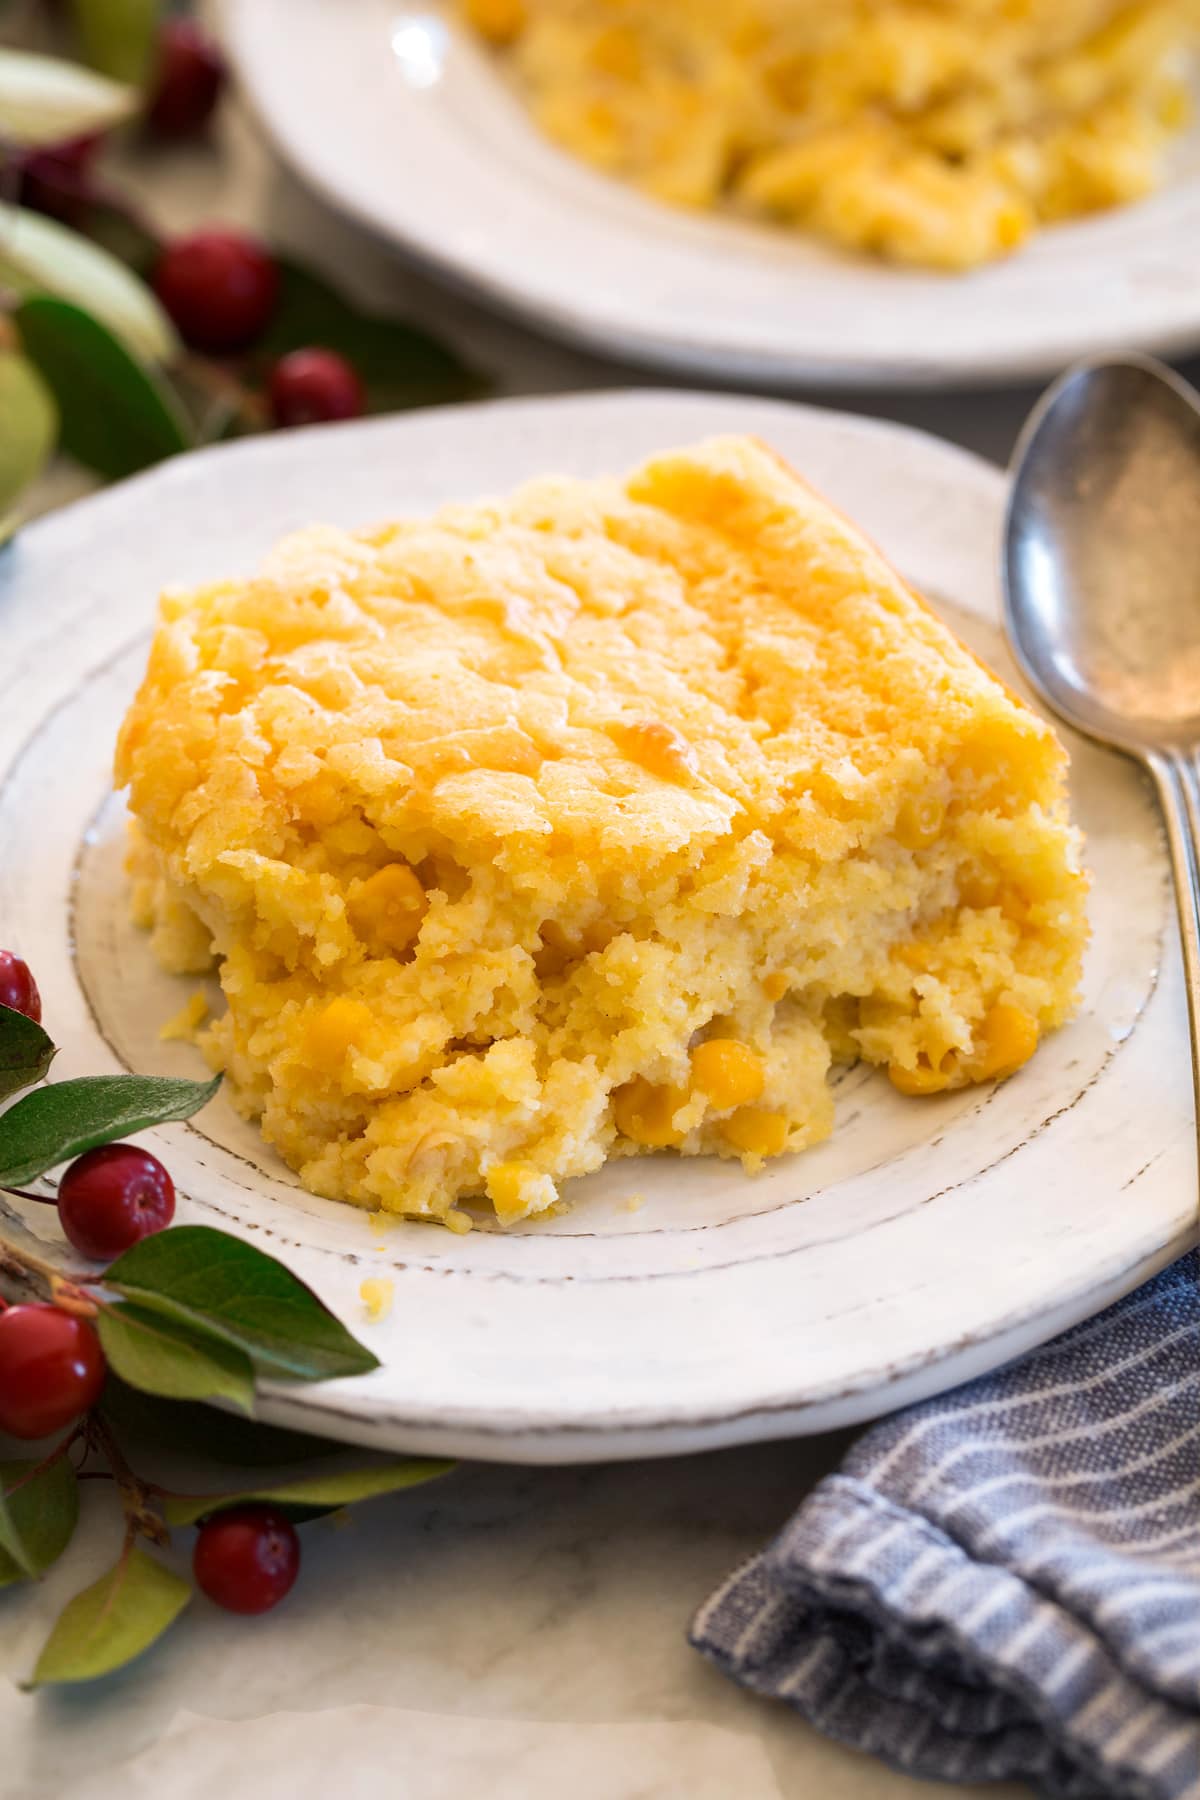 Single serving of corn casserole shown on a white plate with a spoon to the side.